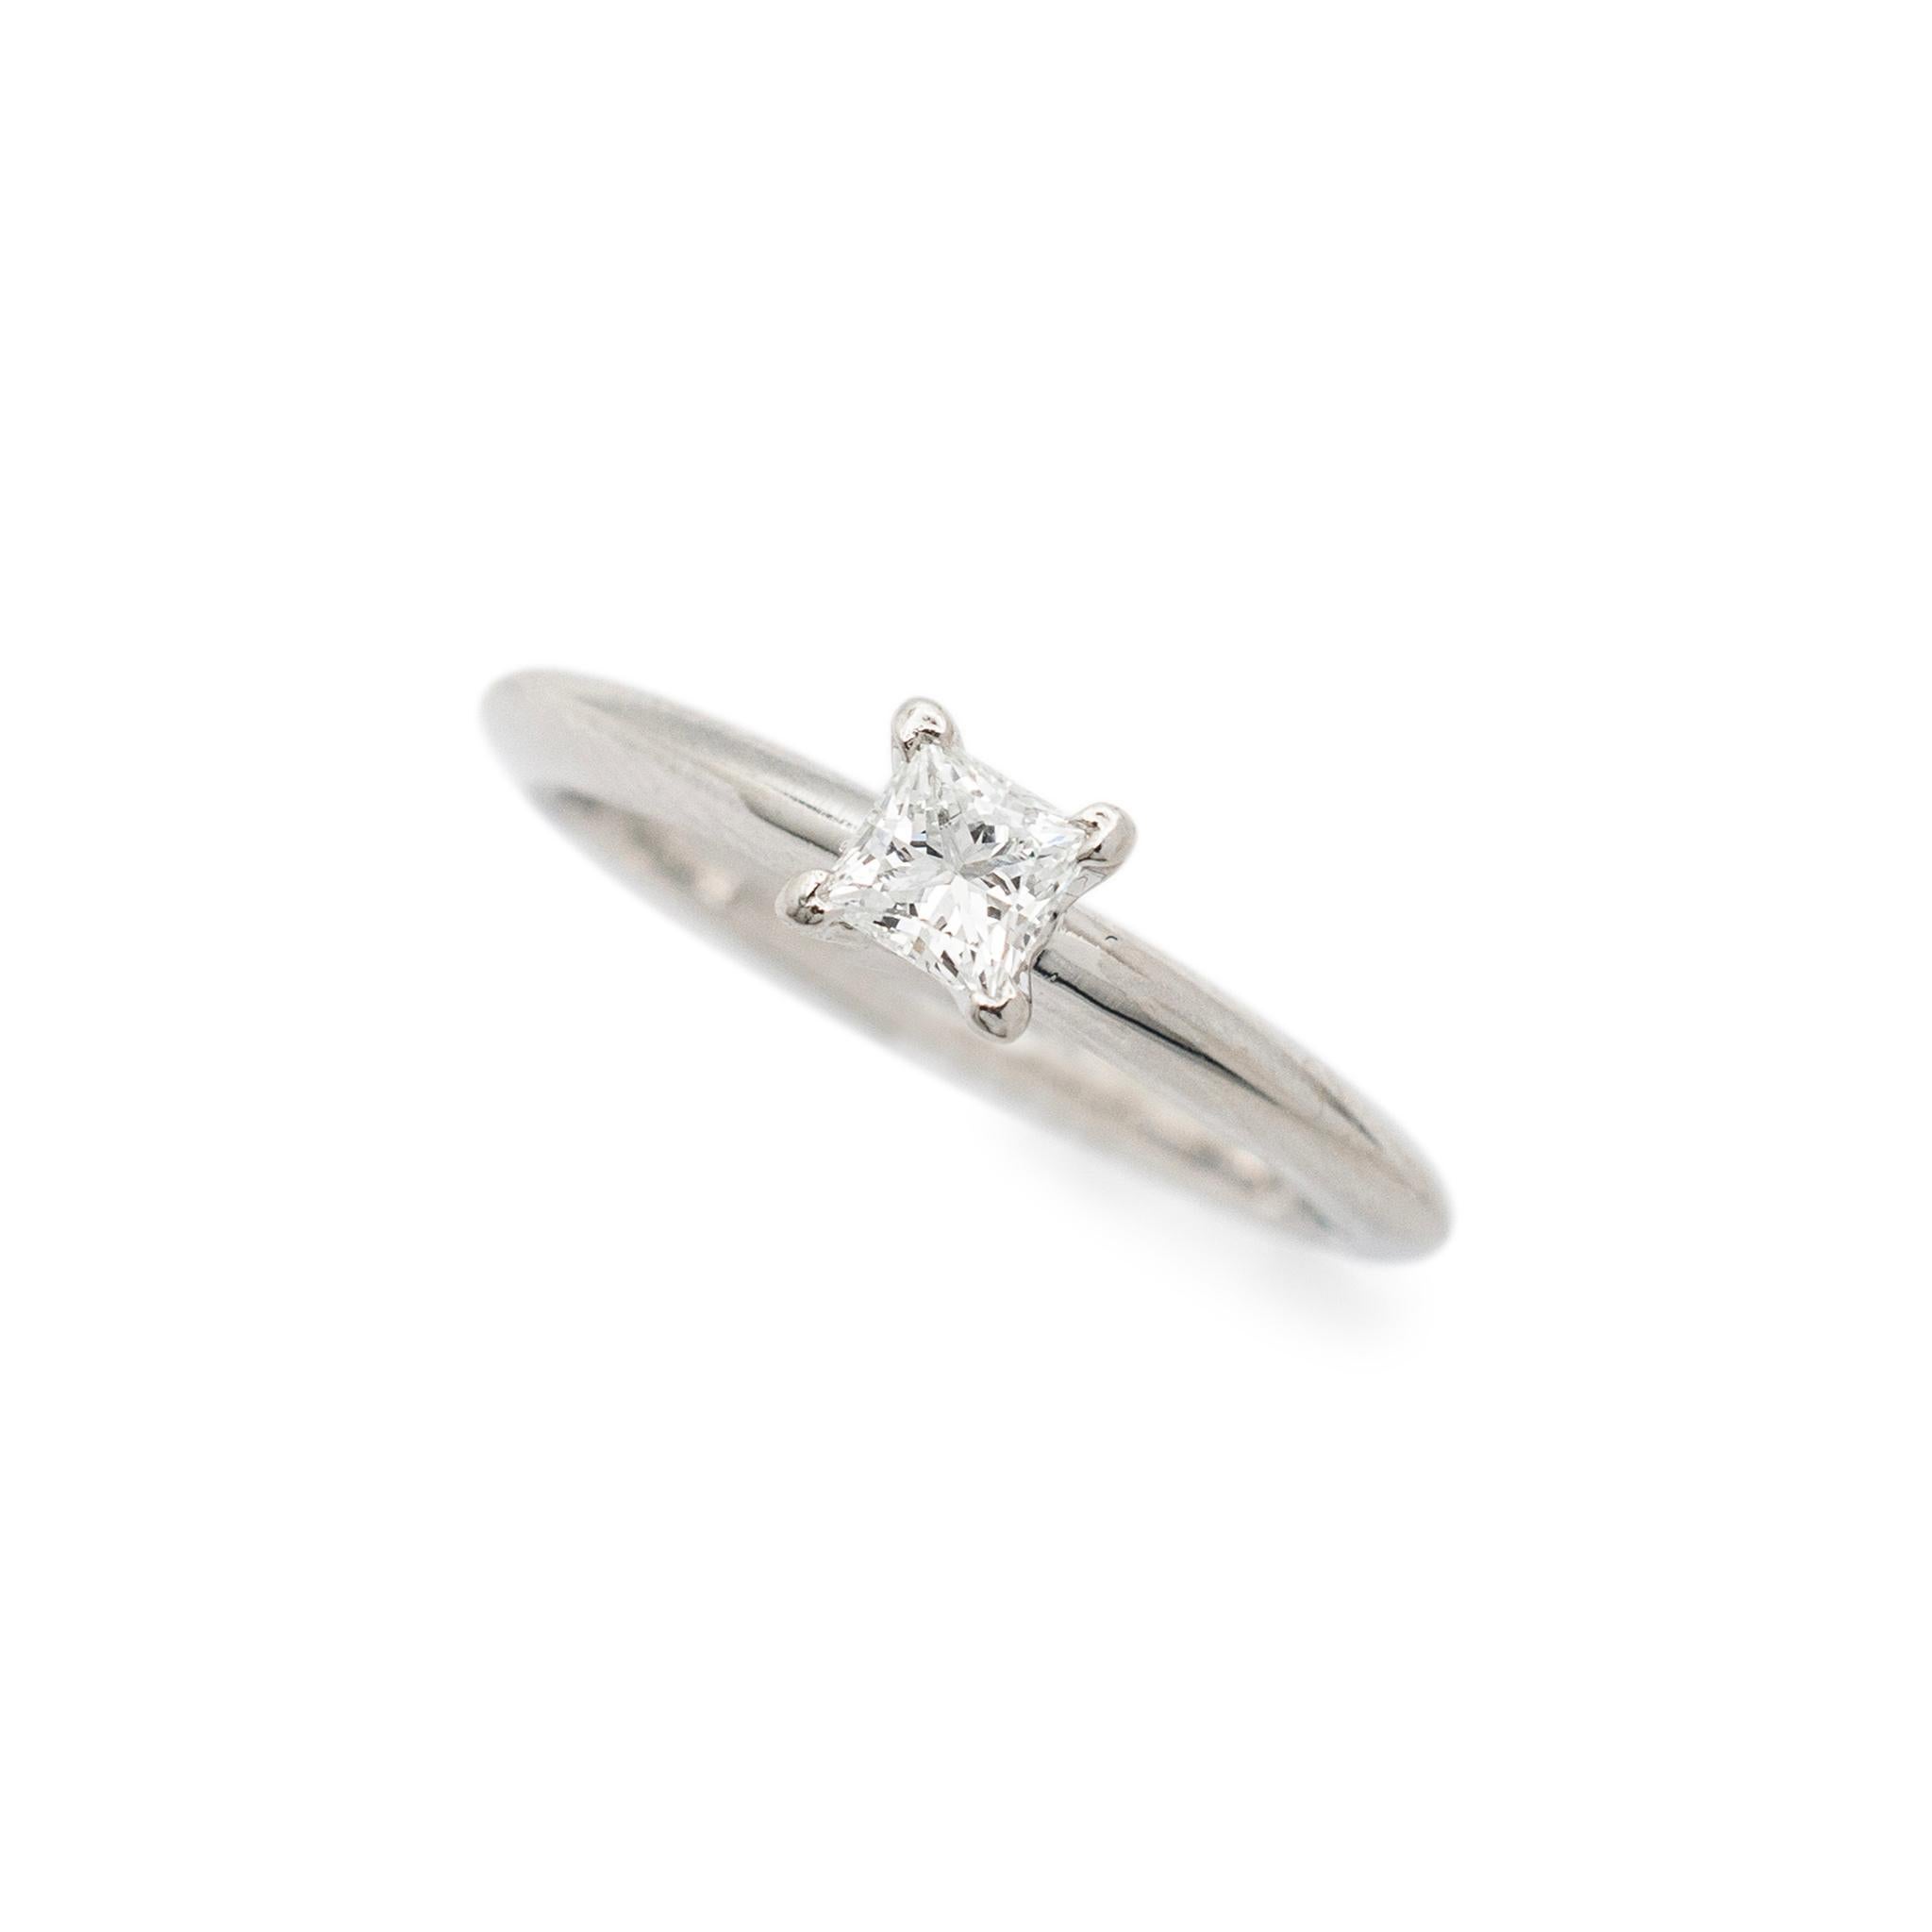 Gender: Ladies

Metal Type: 950 Platinum

Size: 4

Width: 2.00 mm

Weight: 3.63 grams

950 platinum diamond solitaire engagement ring with a half round shank. The metal was tested and determined to be 950 platinum. Engraved with 